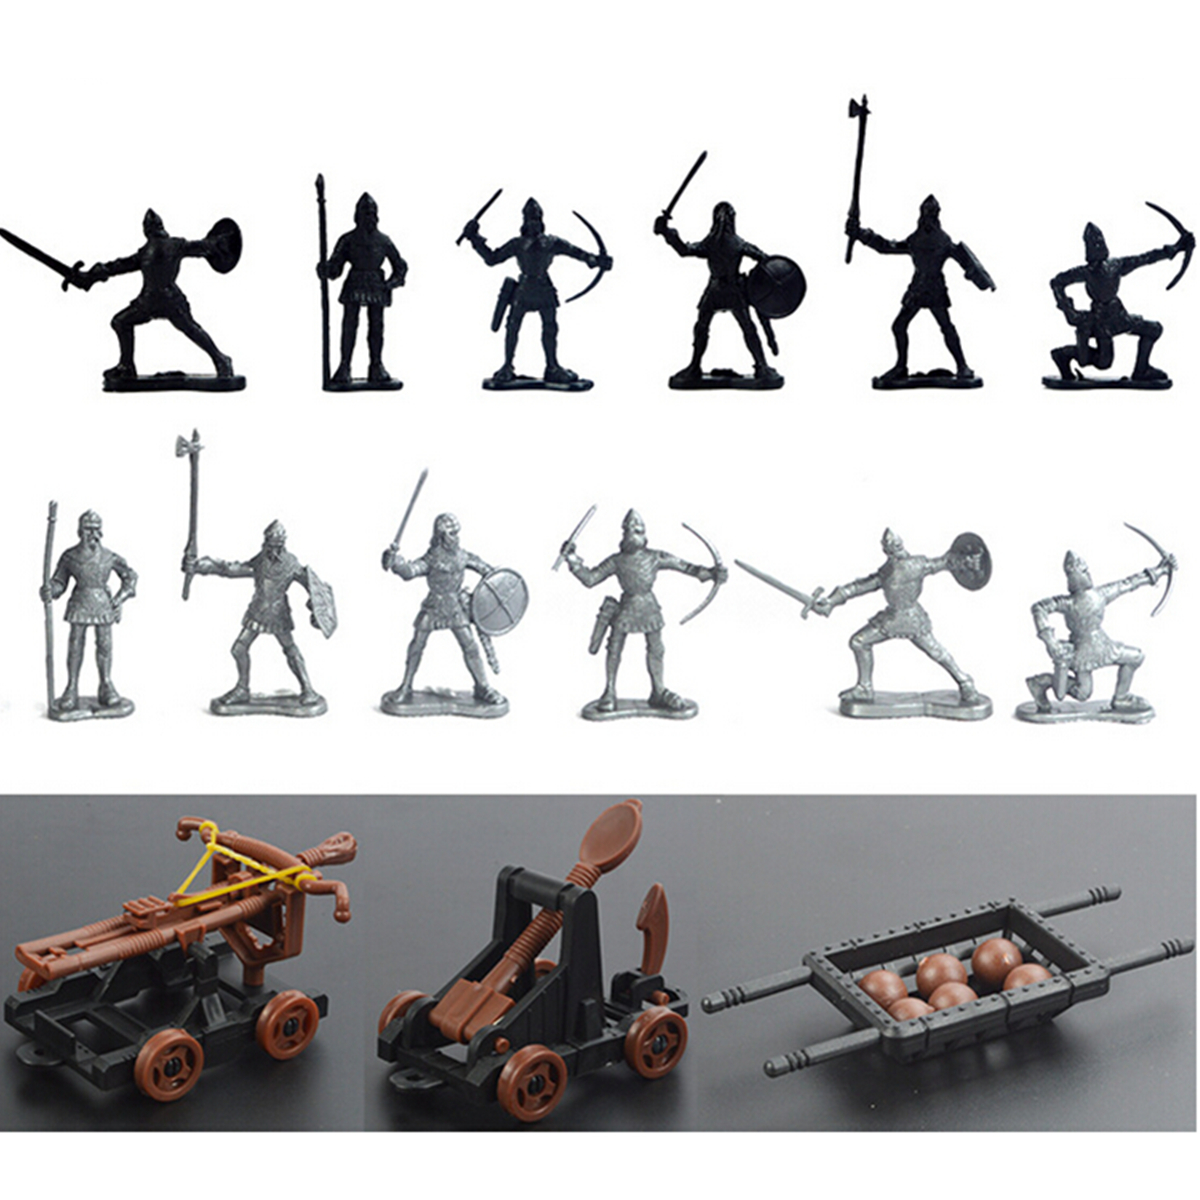 14-pcs-Knights-Medieval-Toy-Soldiers-Action-Figure-Role-Play-Playset-1438440-1